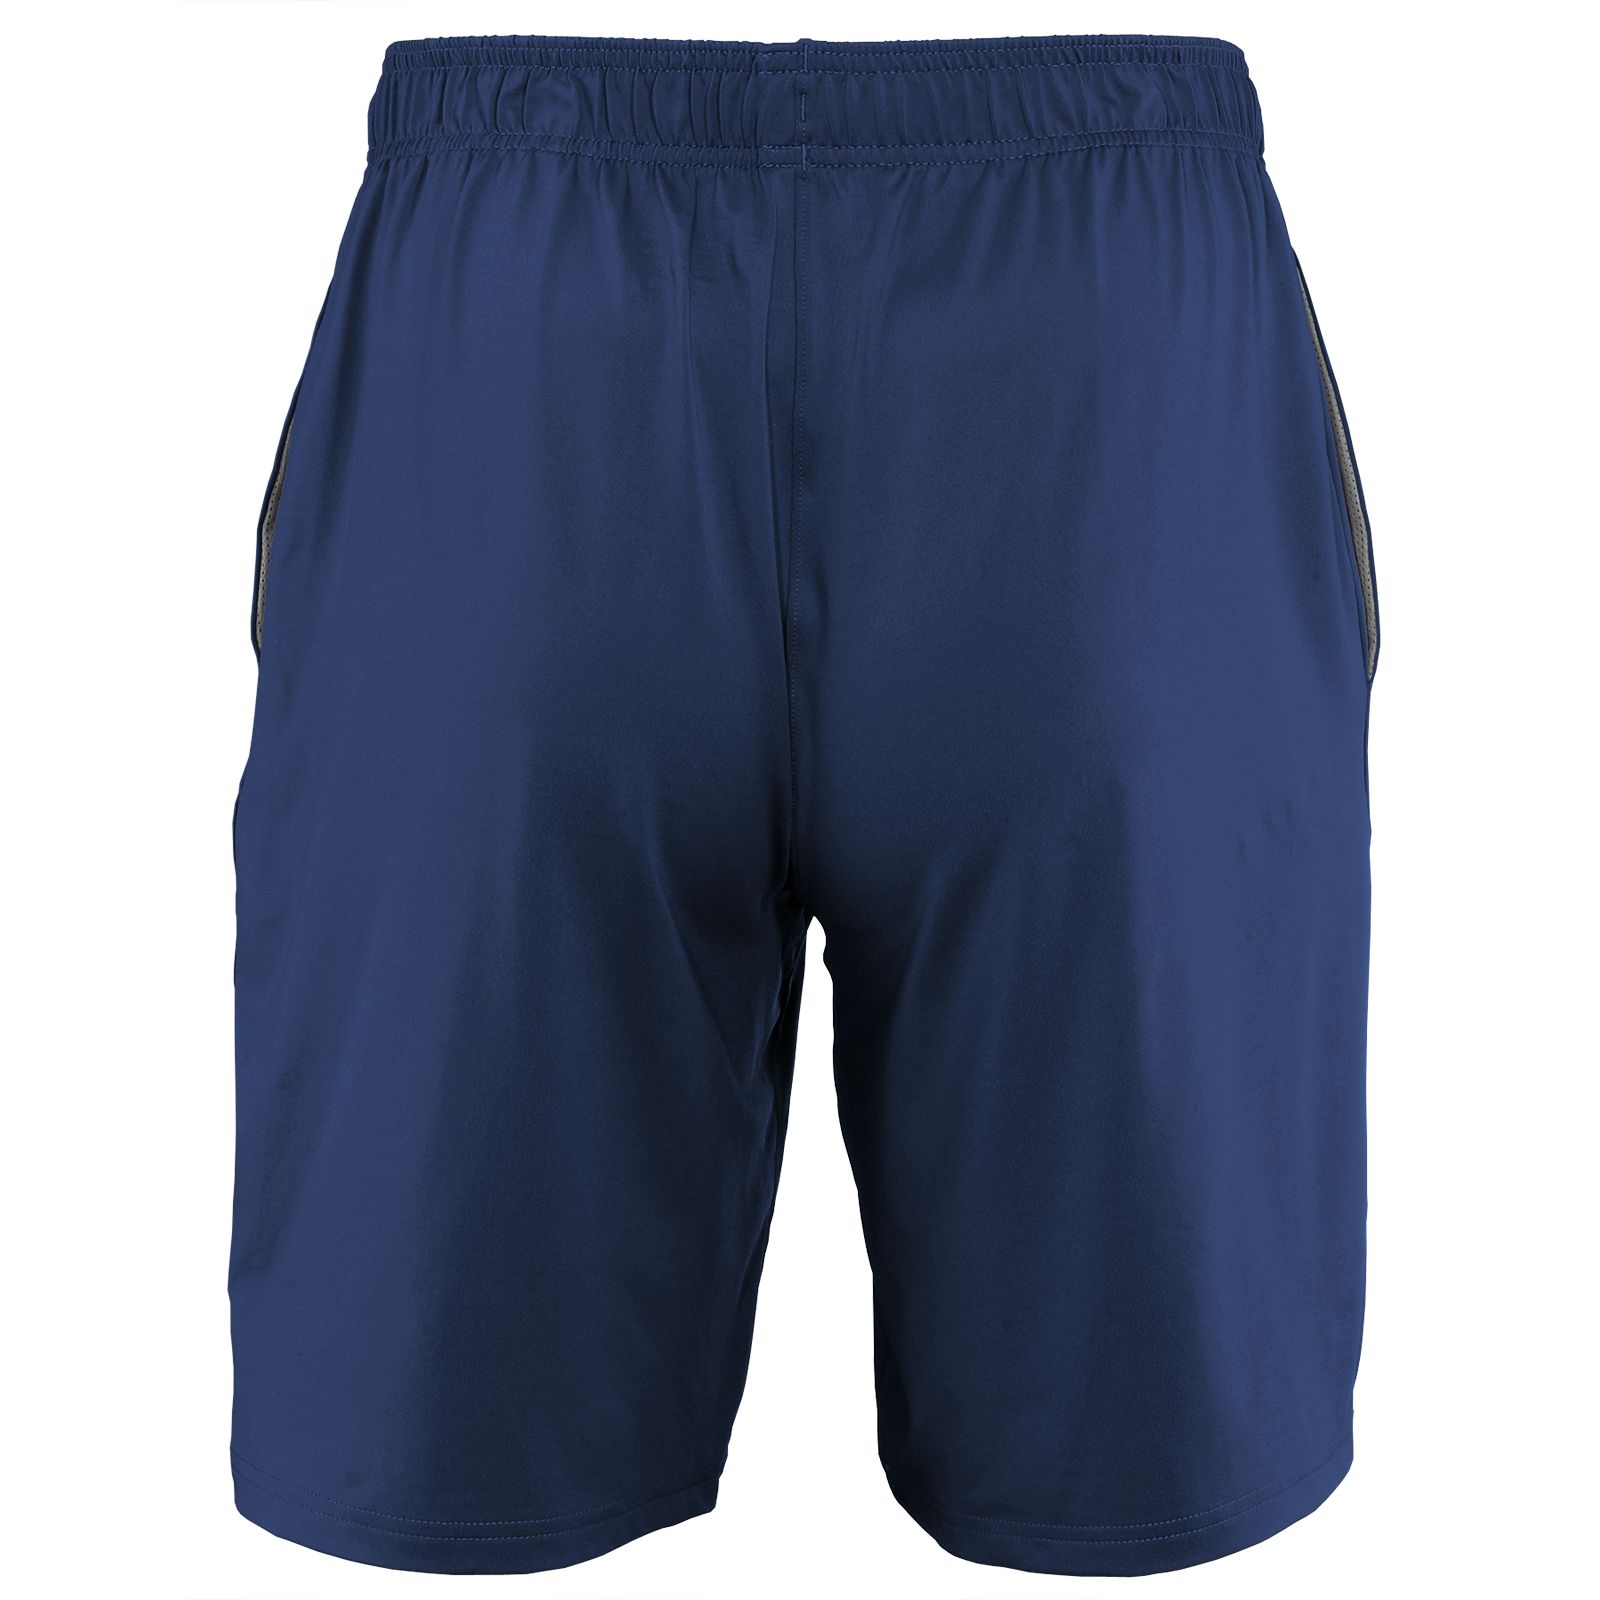 Youth Custom Tech Shorts, Team Navy image number 2